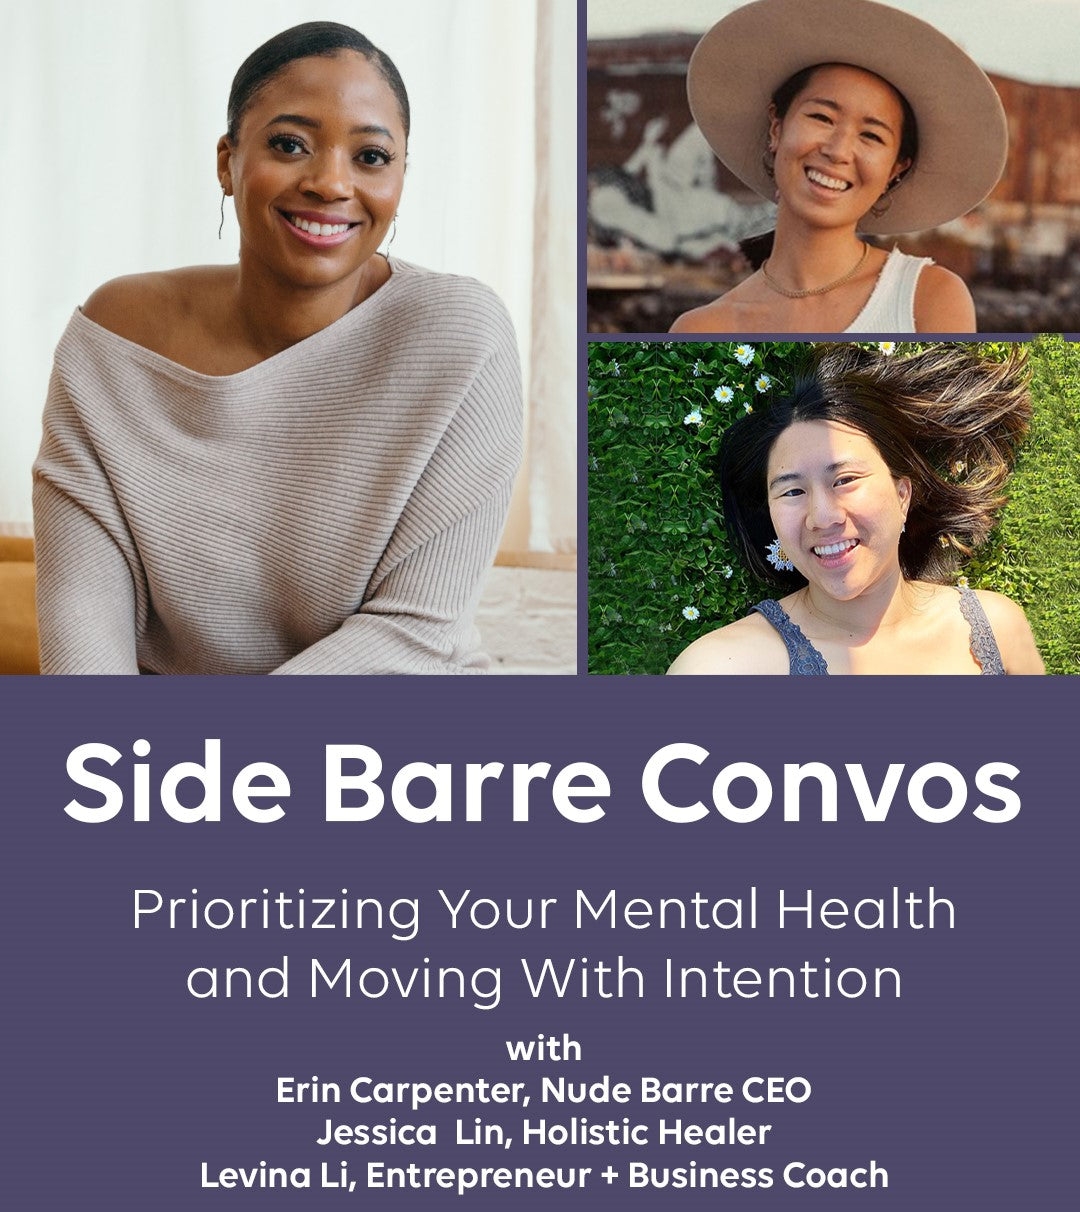 SIDE BARRE Convos | Prioritizing your Mental Health and Moving with Intention